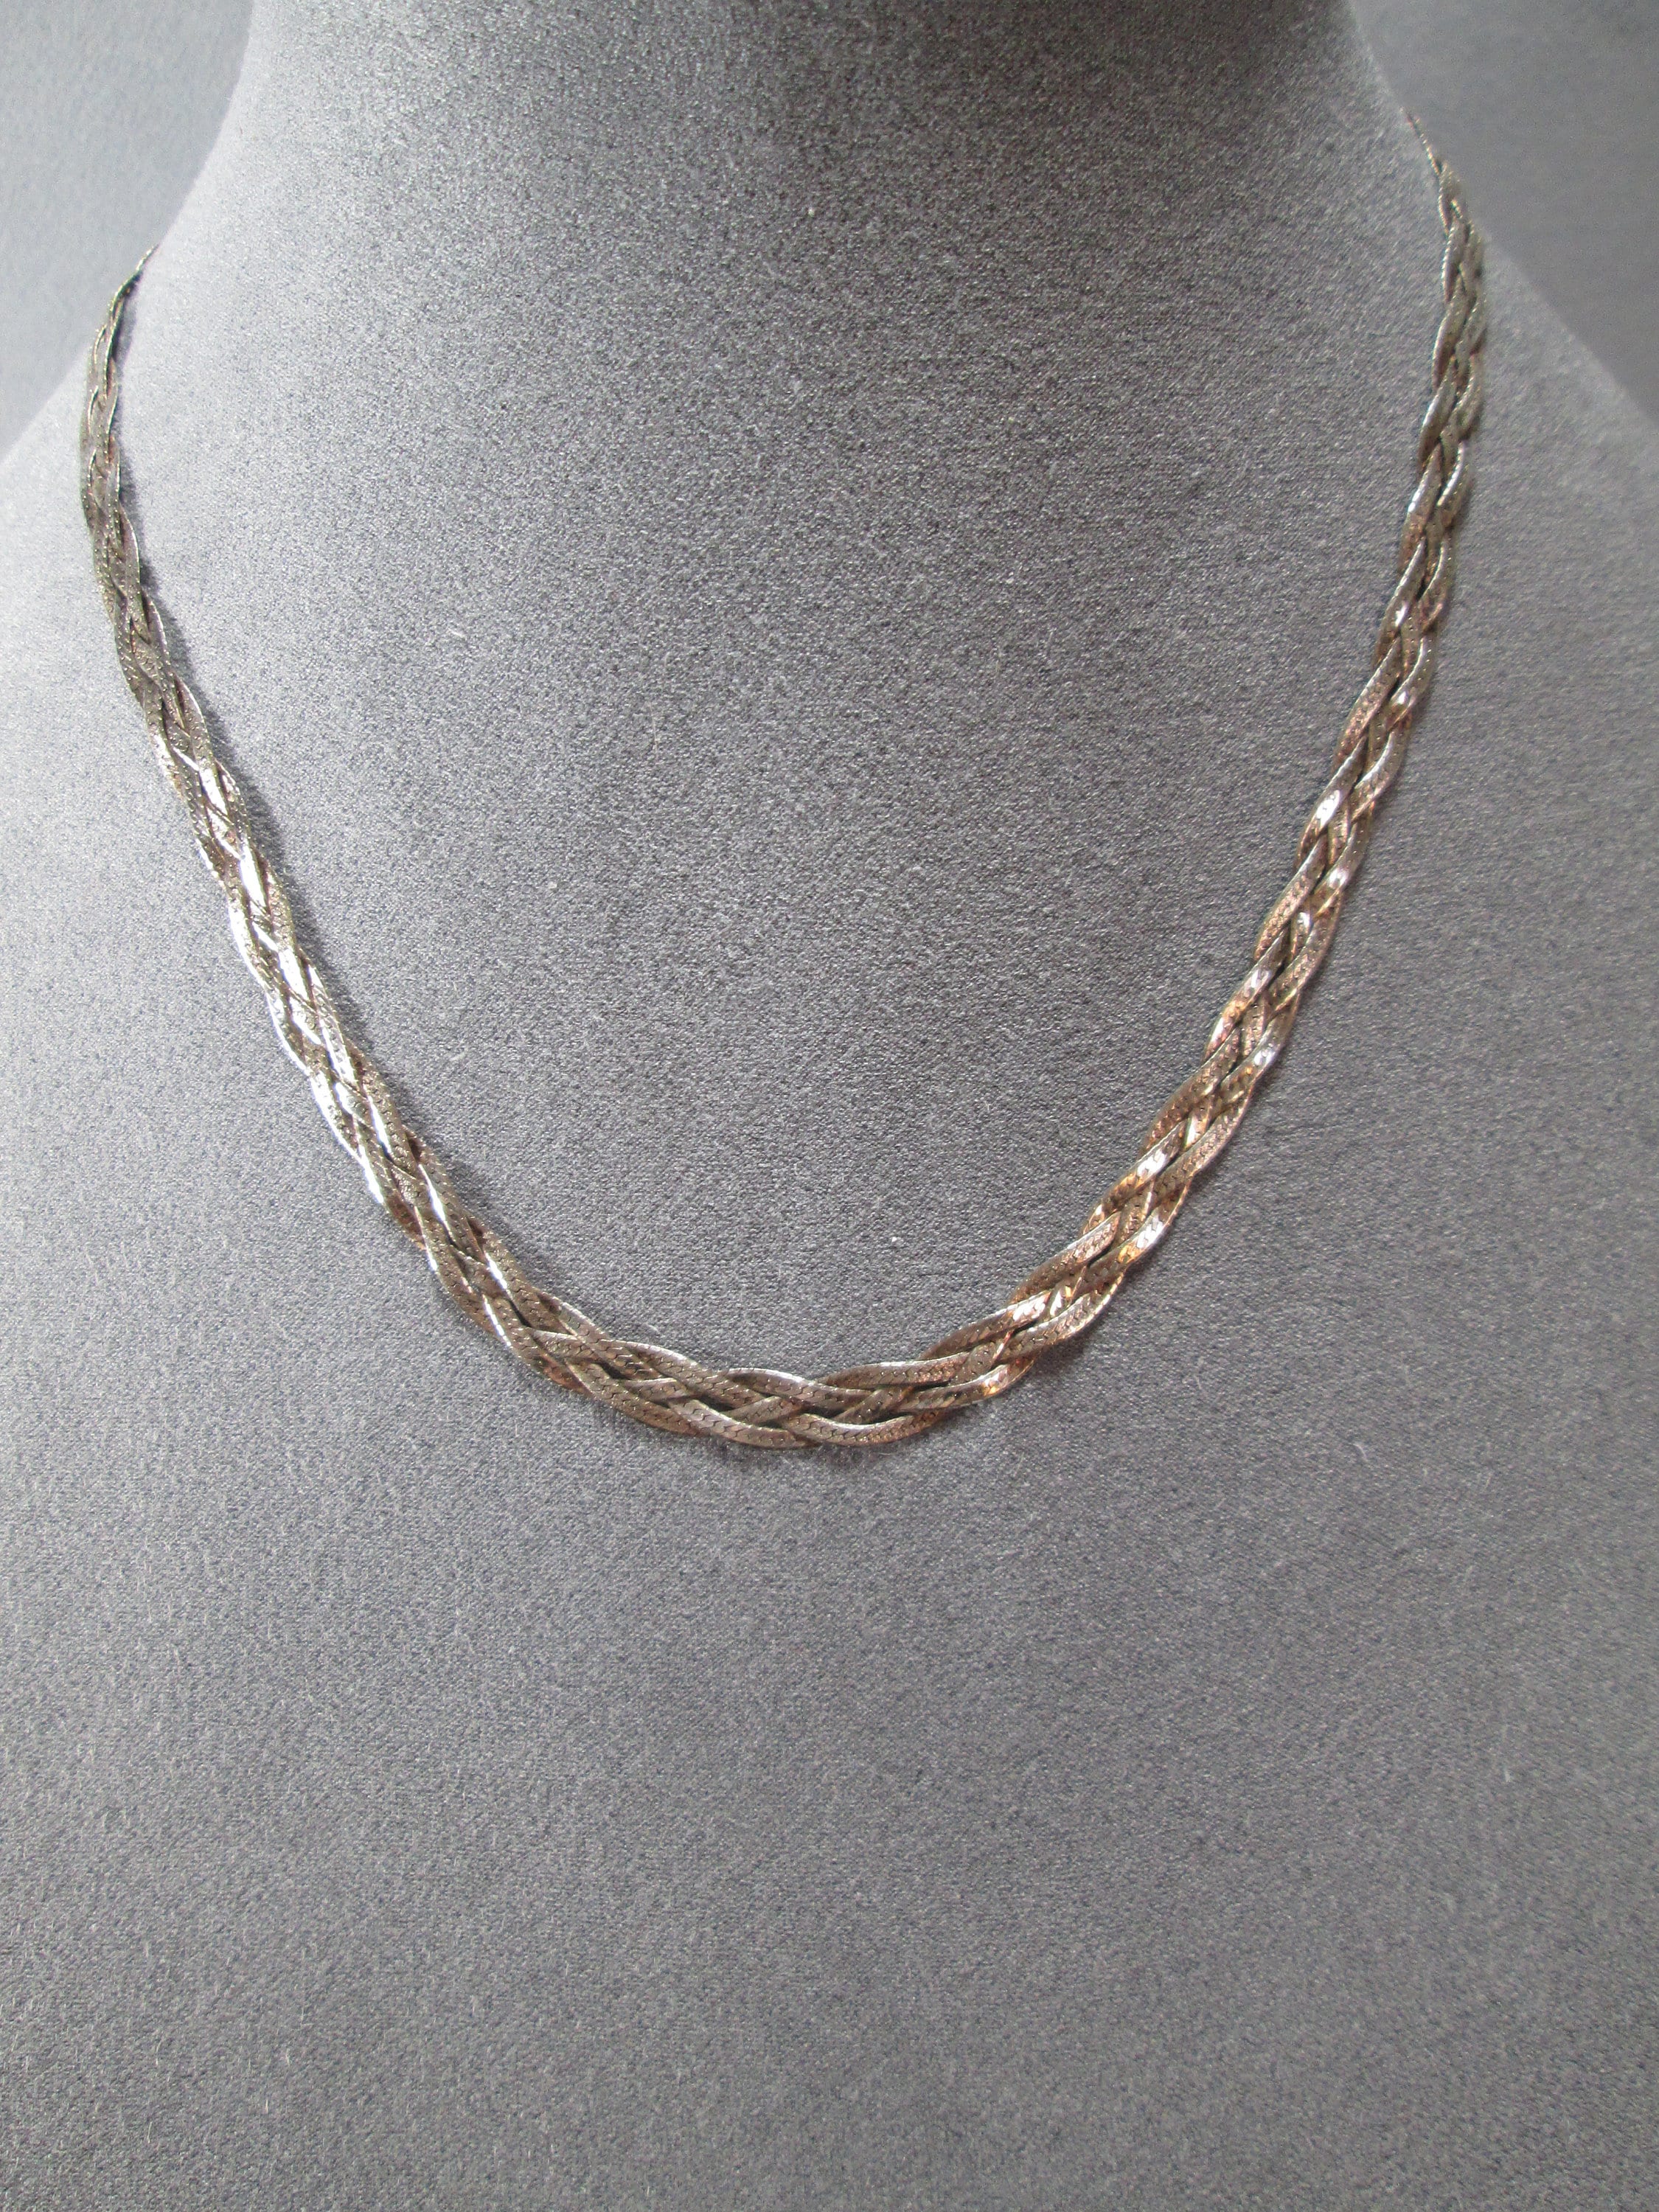 Sterling Silver Braided Chain Necklace Three Silver Strands - Etsy